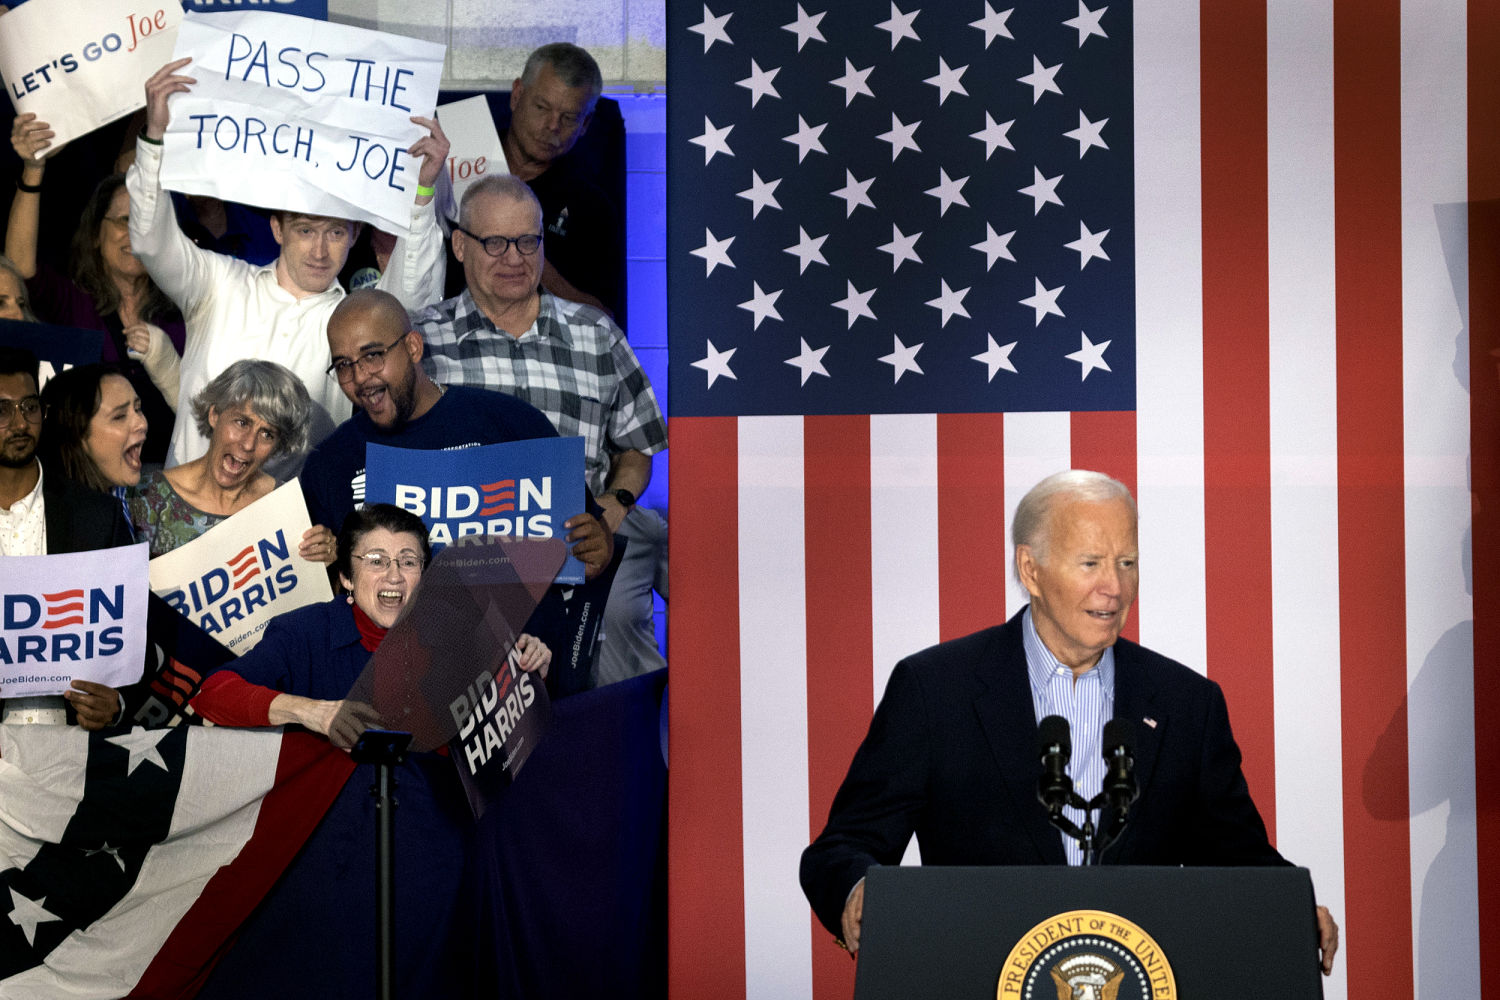 Radio hosts say Biden's campaign aides provided questions before interviews